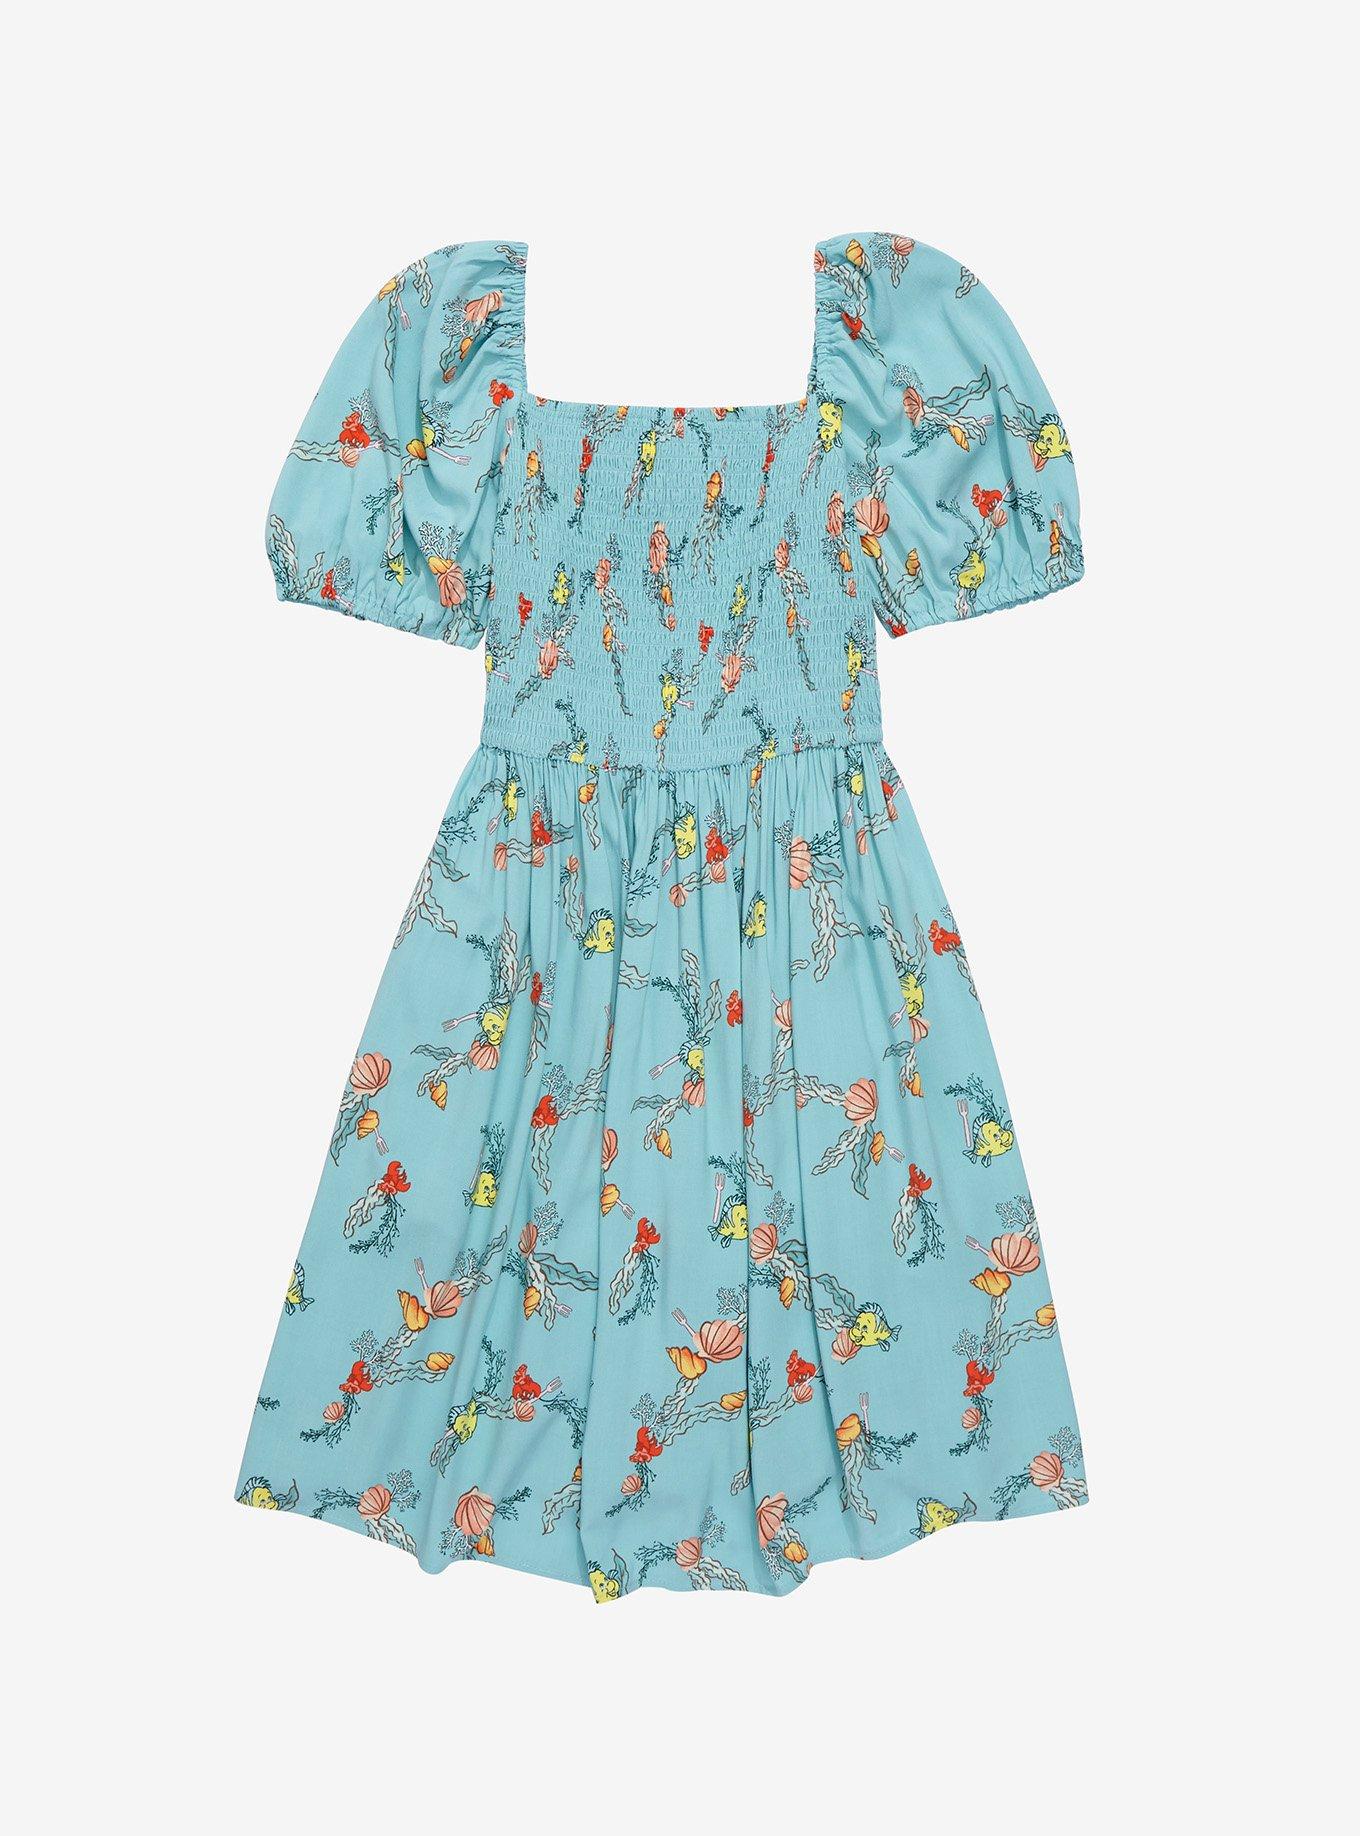 Dance Into Spring With Disney Smocked Dresses From BoxLunch